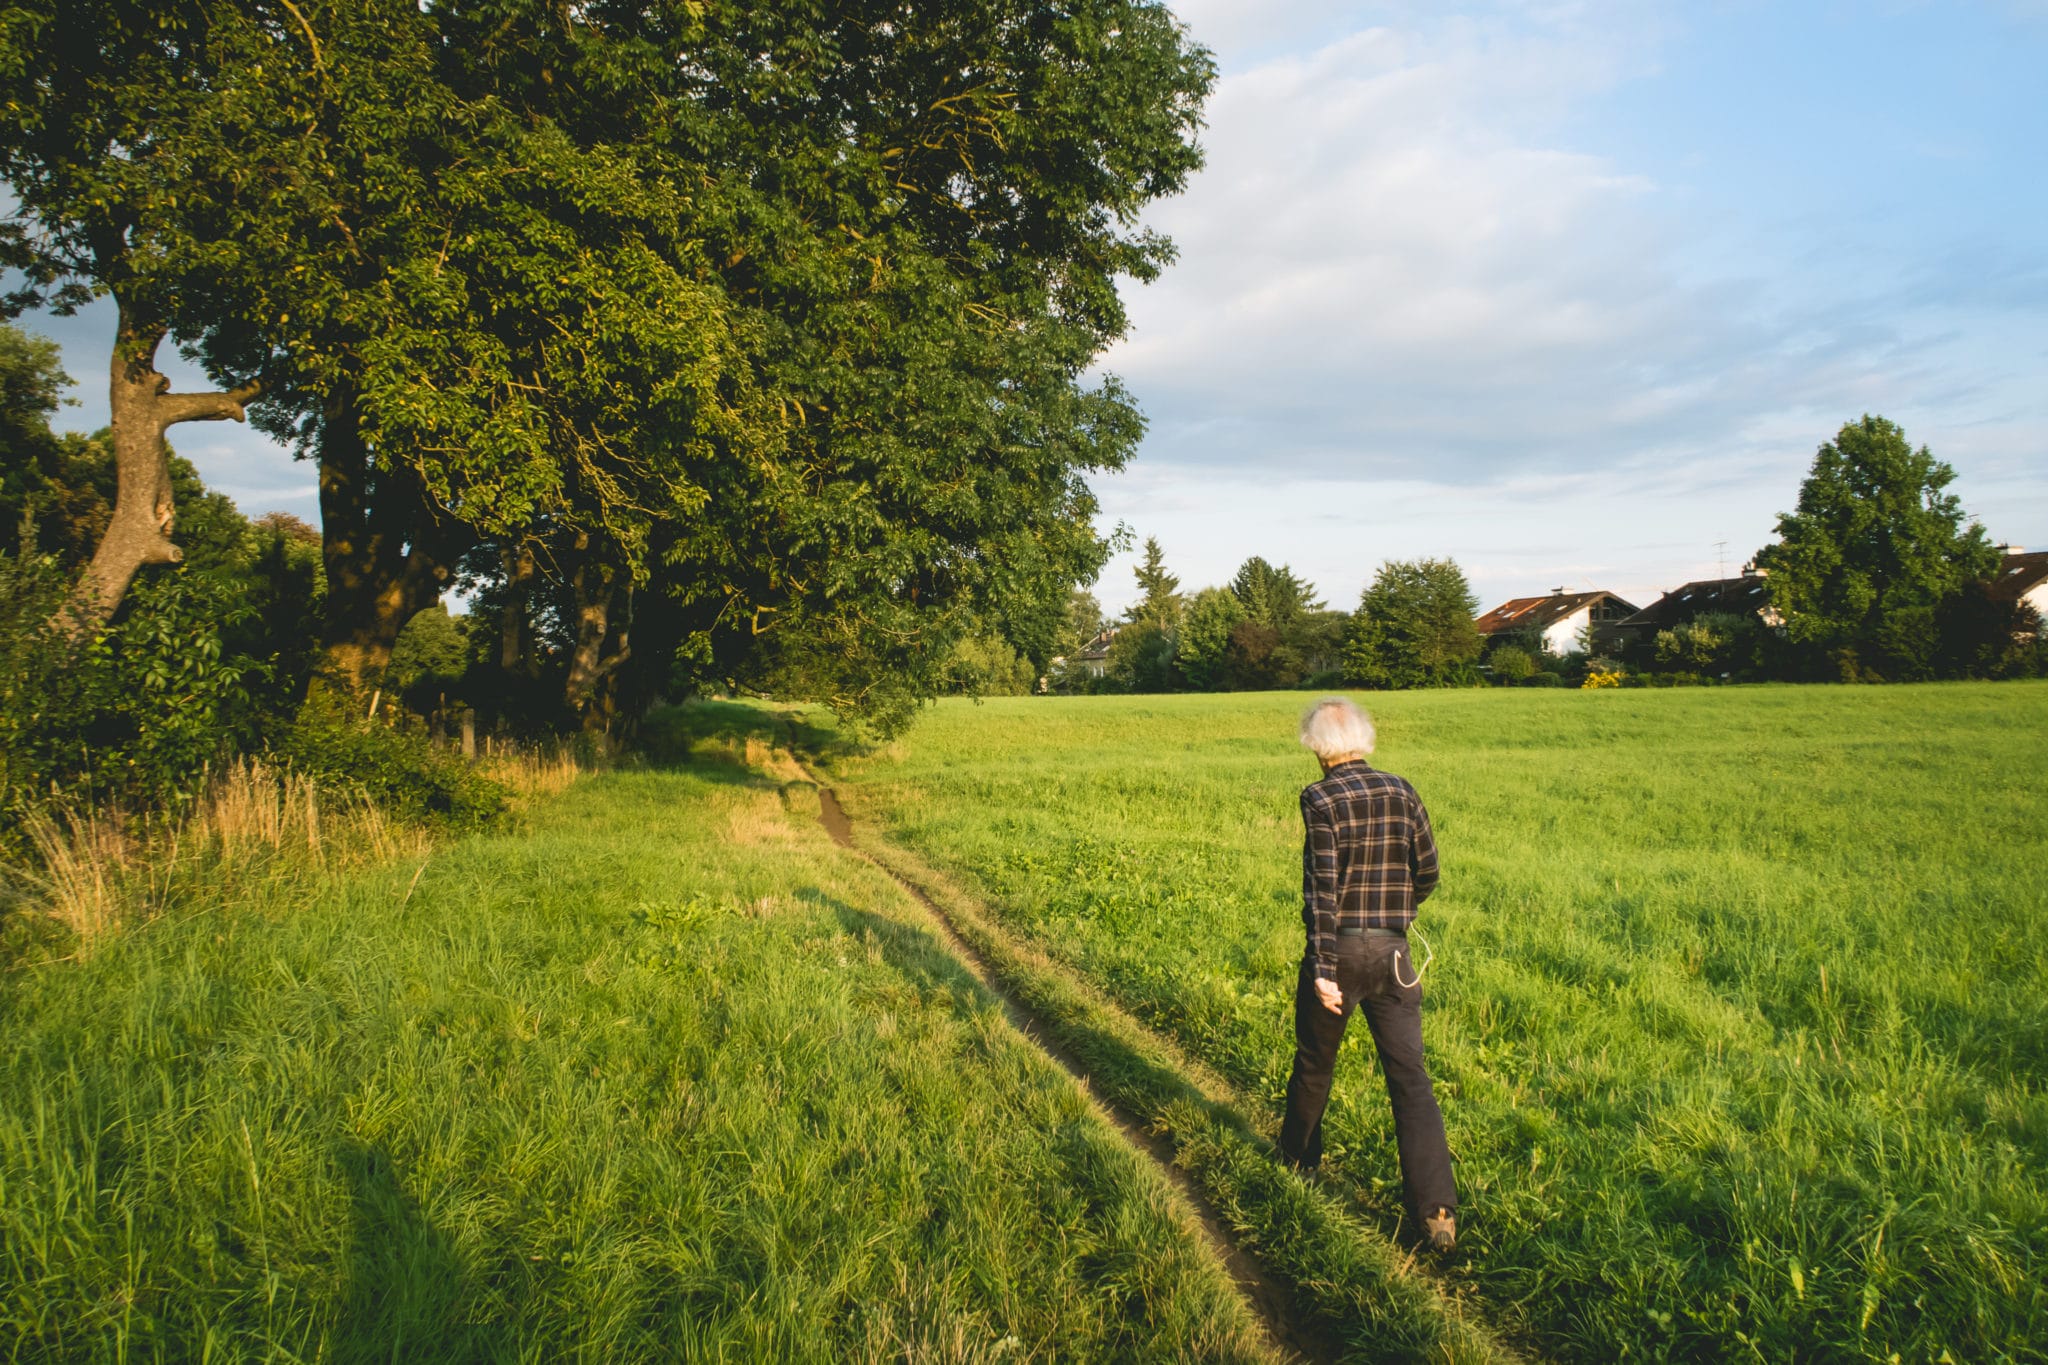 Old man walking in a green field during the sunset in the countryside.